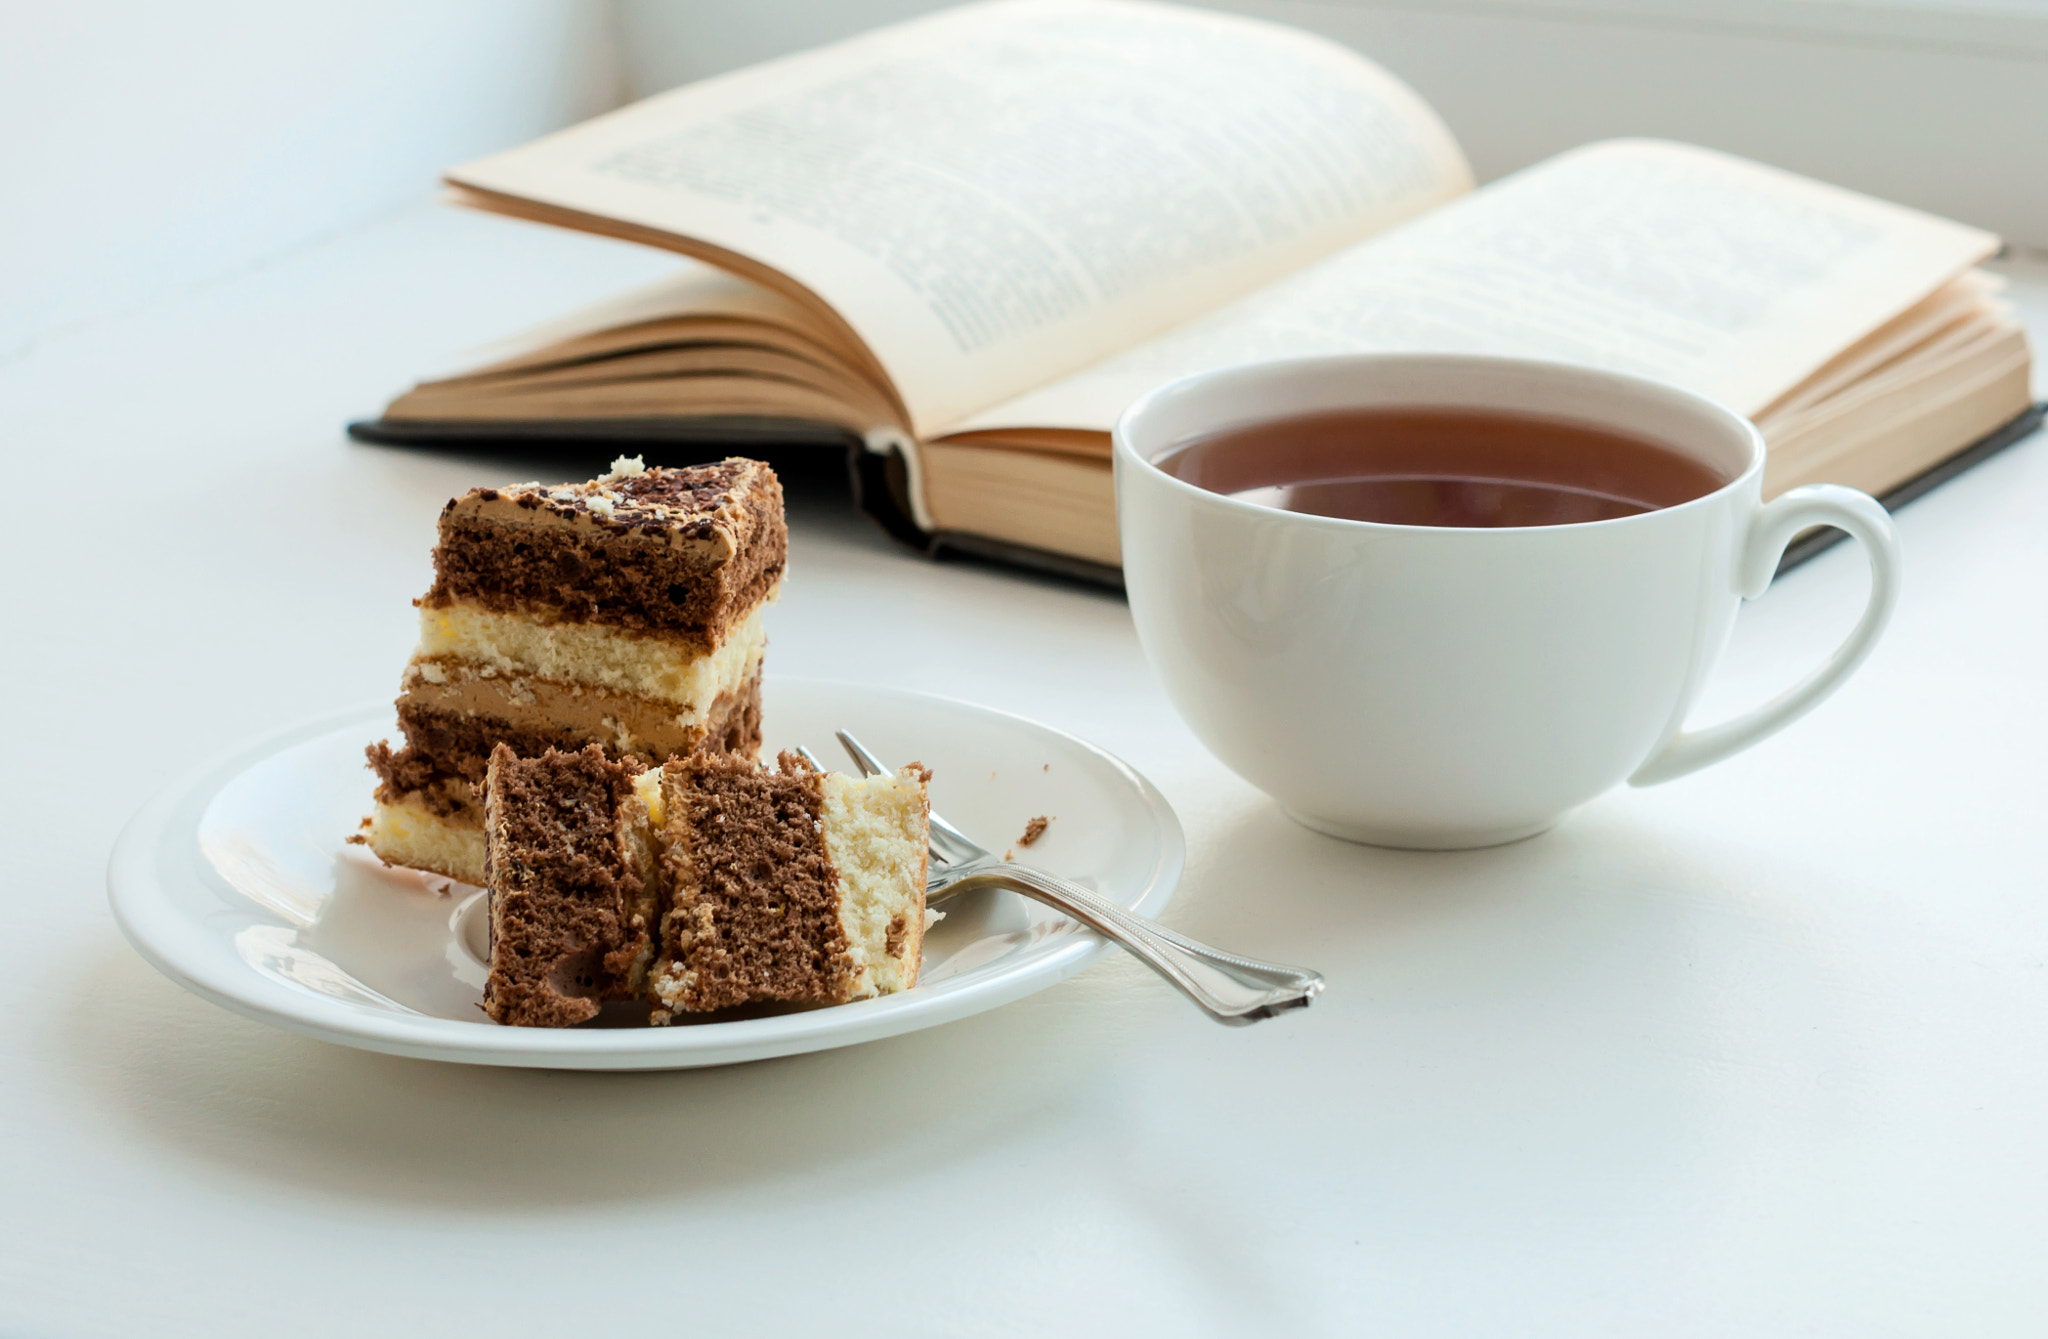 Cup of tea, cake and some books to read lying on the table